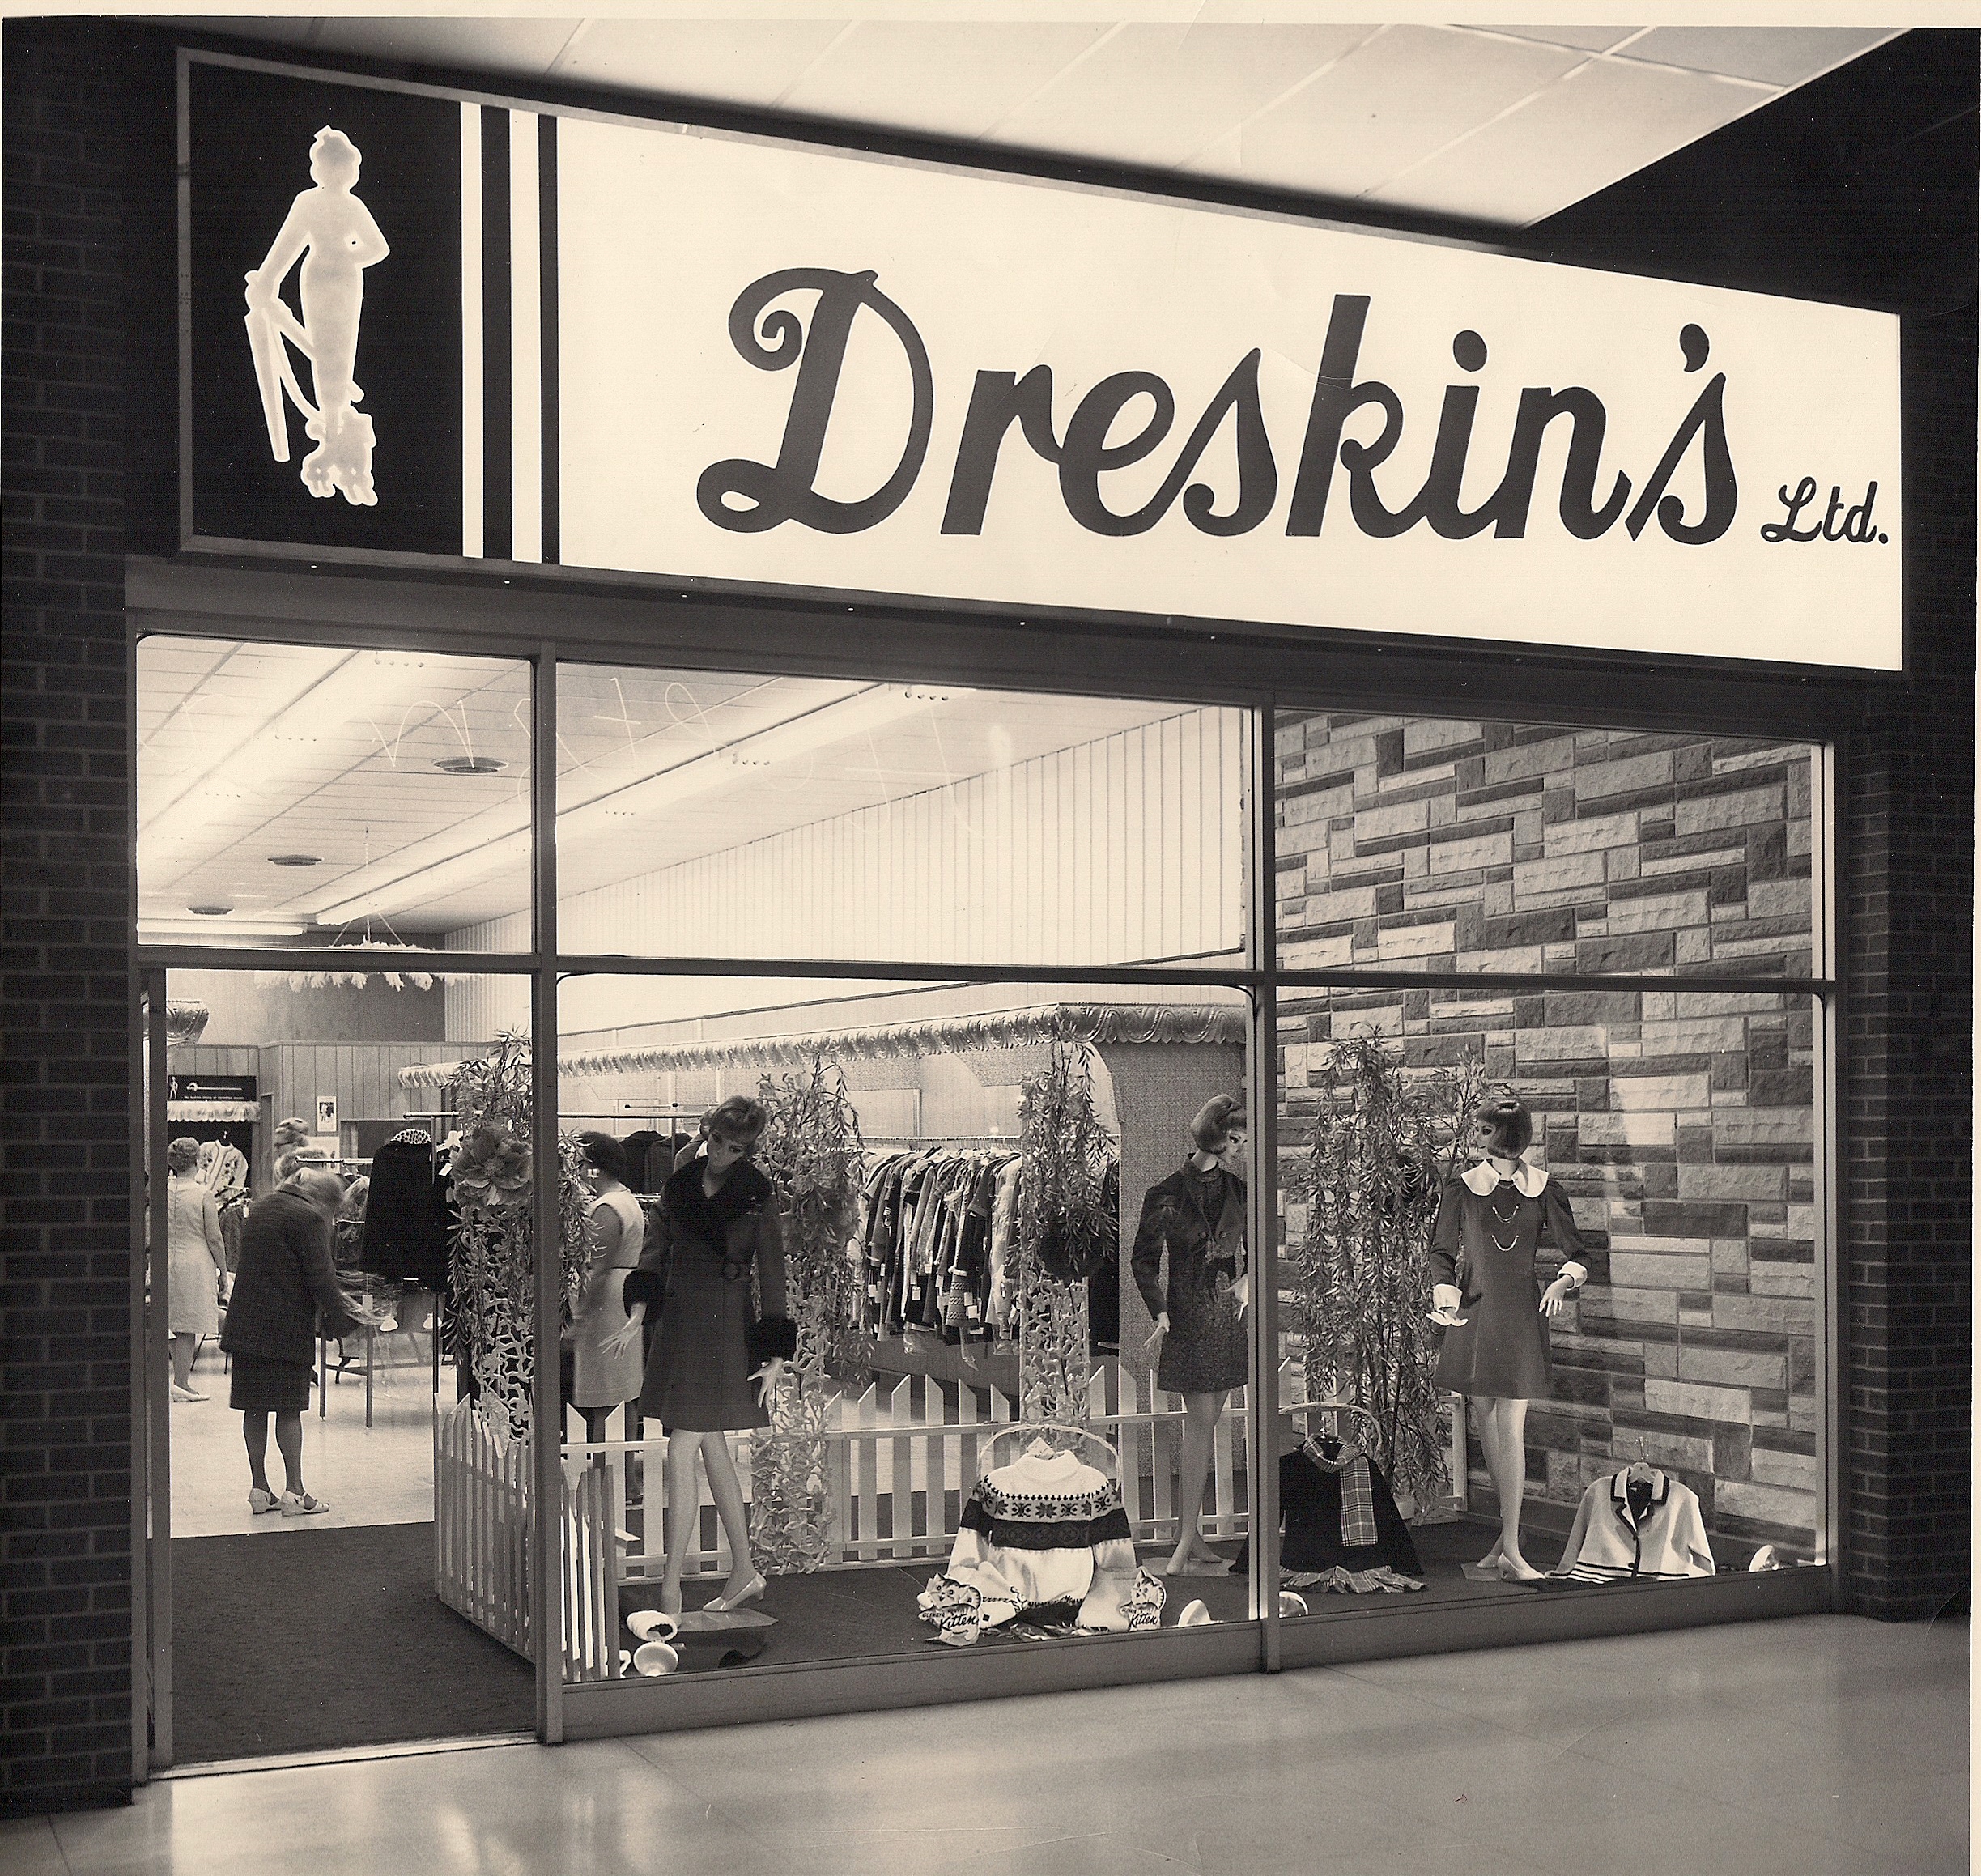 Storefront for shopping mall location of Dreskin’s Ltd. Three mannequins in short coats are arranged in the glass window with racks of clothing and customers seen inside the store.